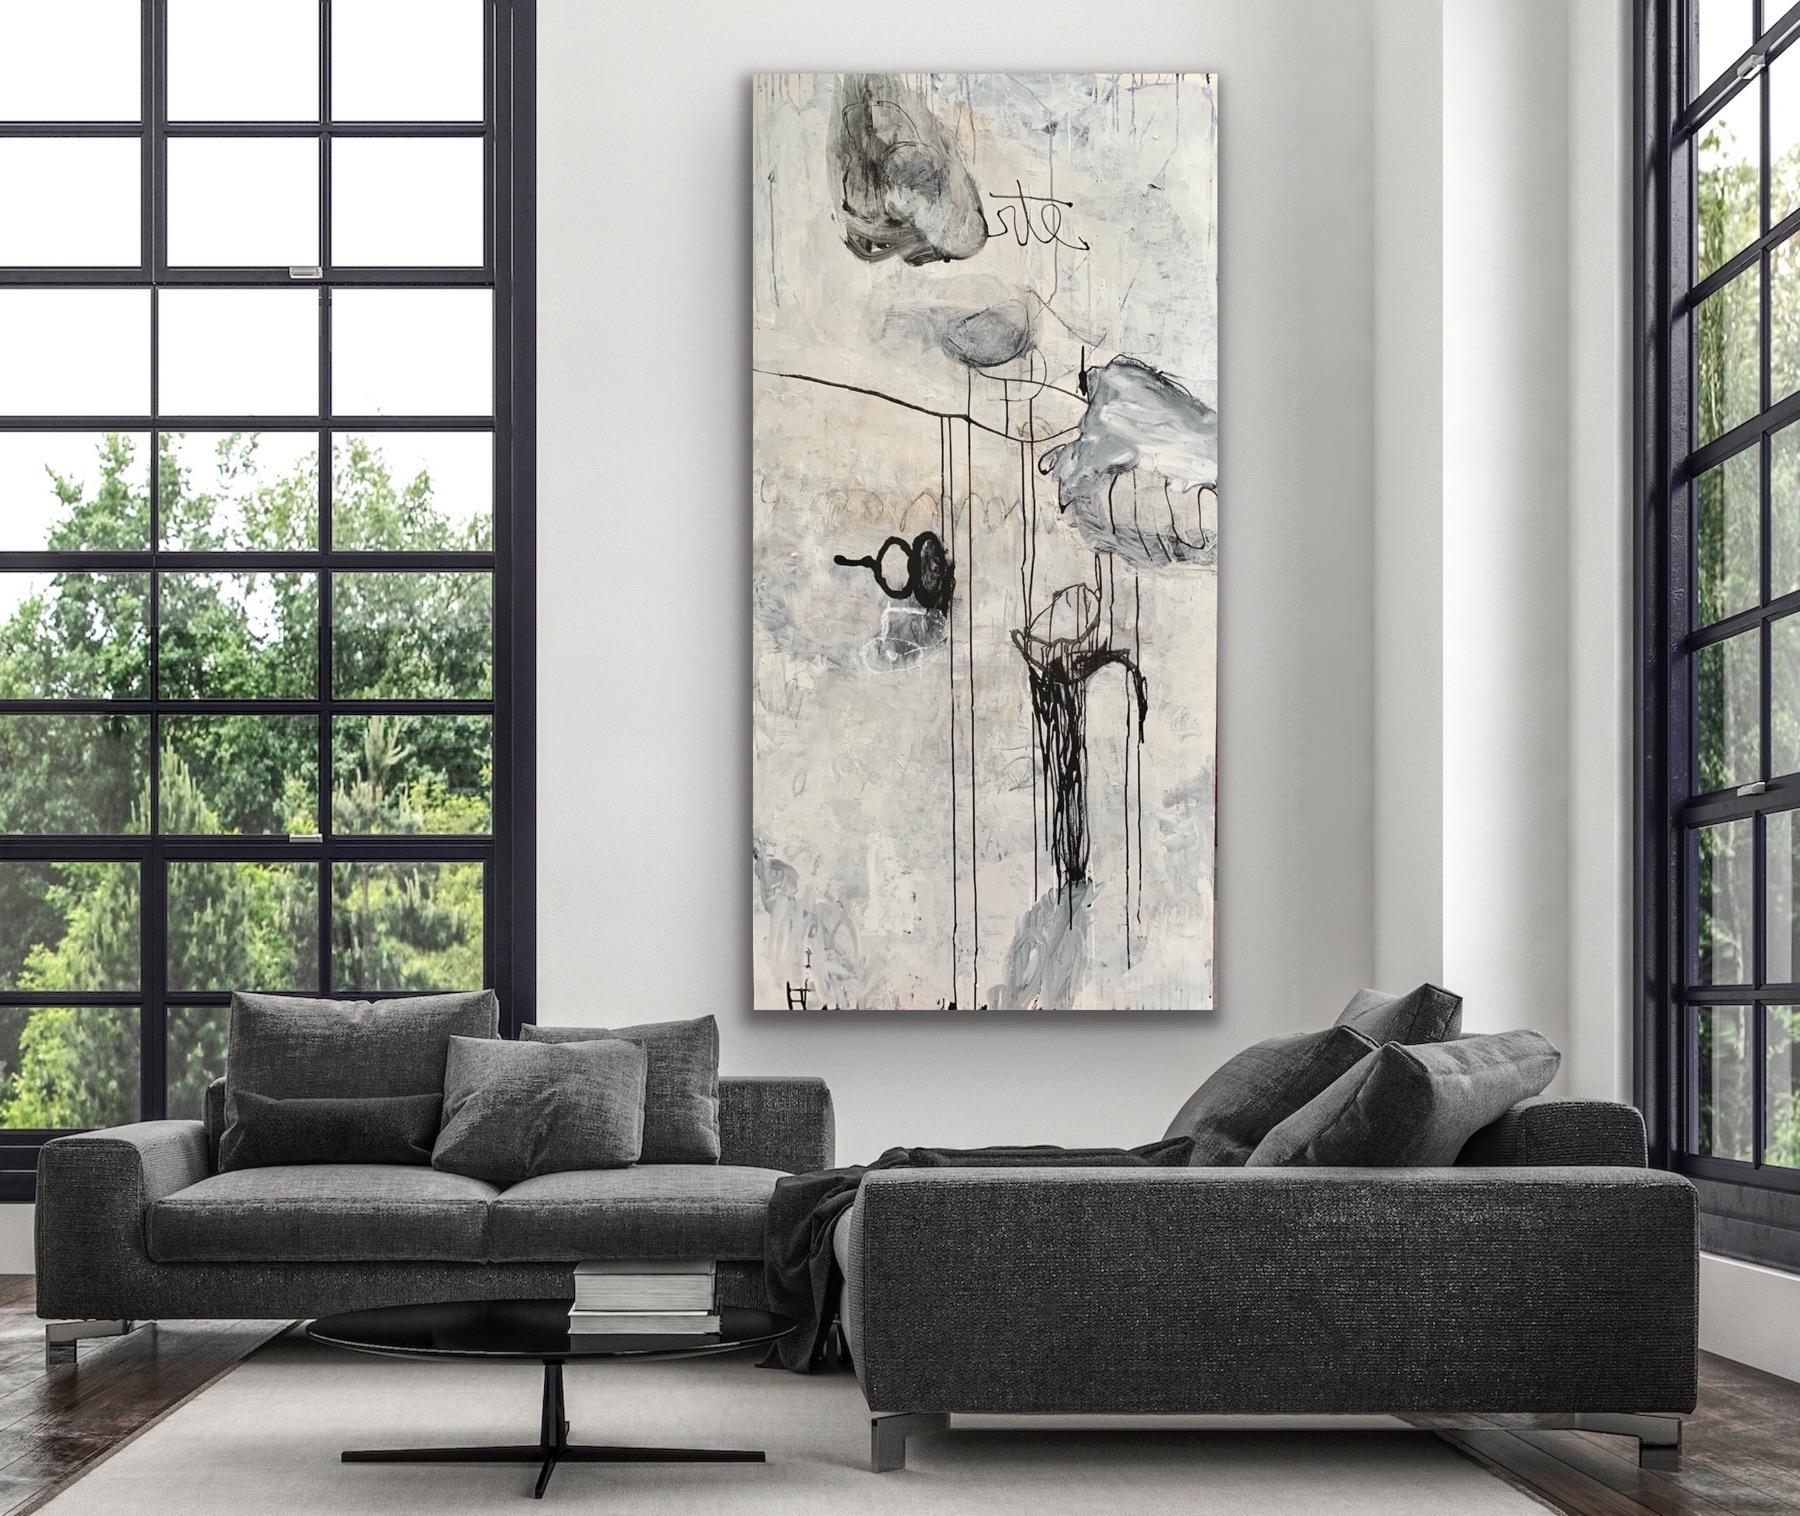 WINTER SERIES #5 - large white and black abstract expressionist painting  - Painting by Silvia Poloto